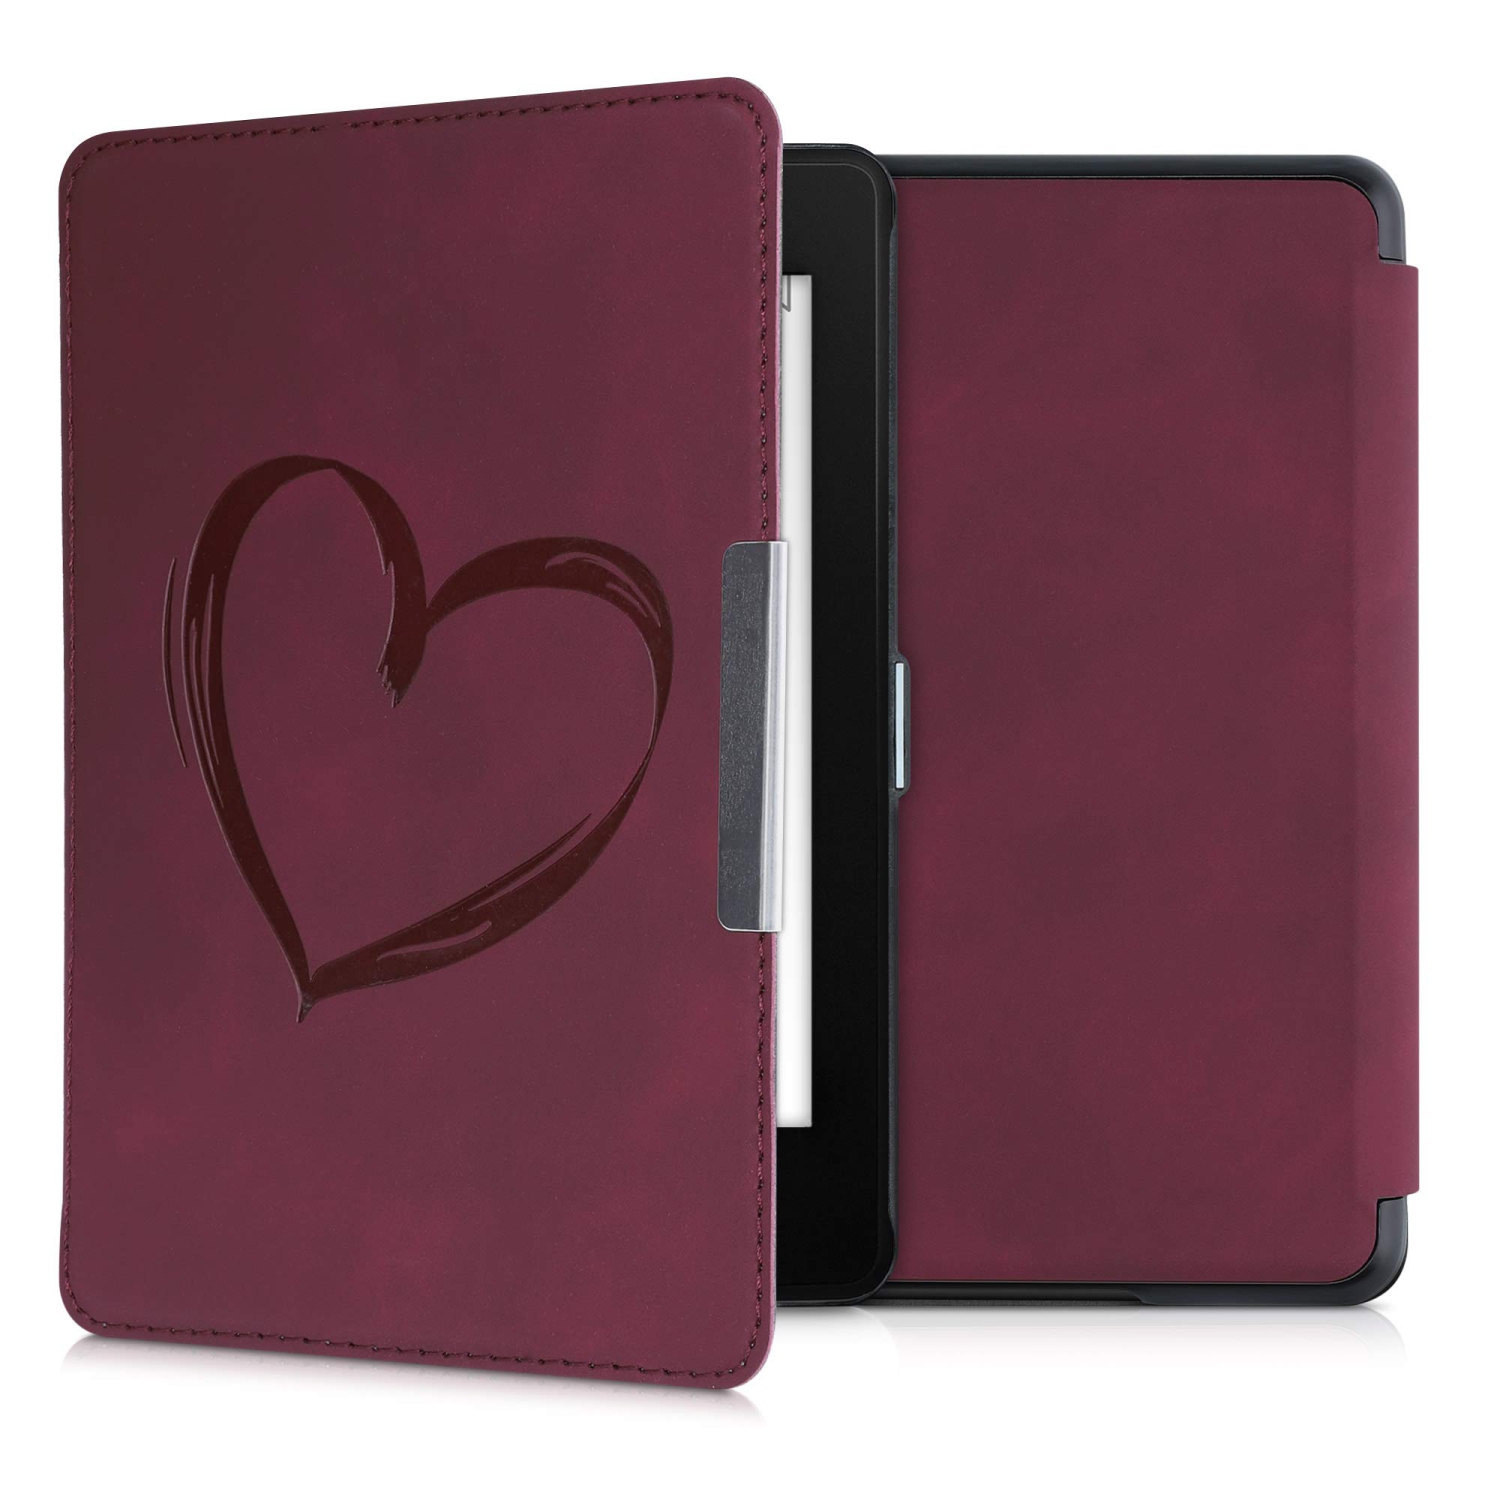 kwmobile Case Compatible with Amazon Kindle Paperwhite (10. Gen - 2018) - Case e-Reader Cover - Brushed Heart Dark Red